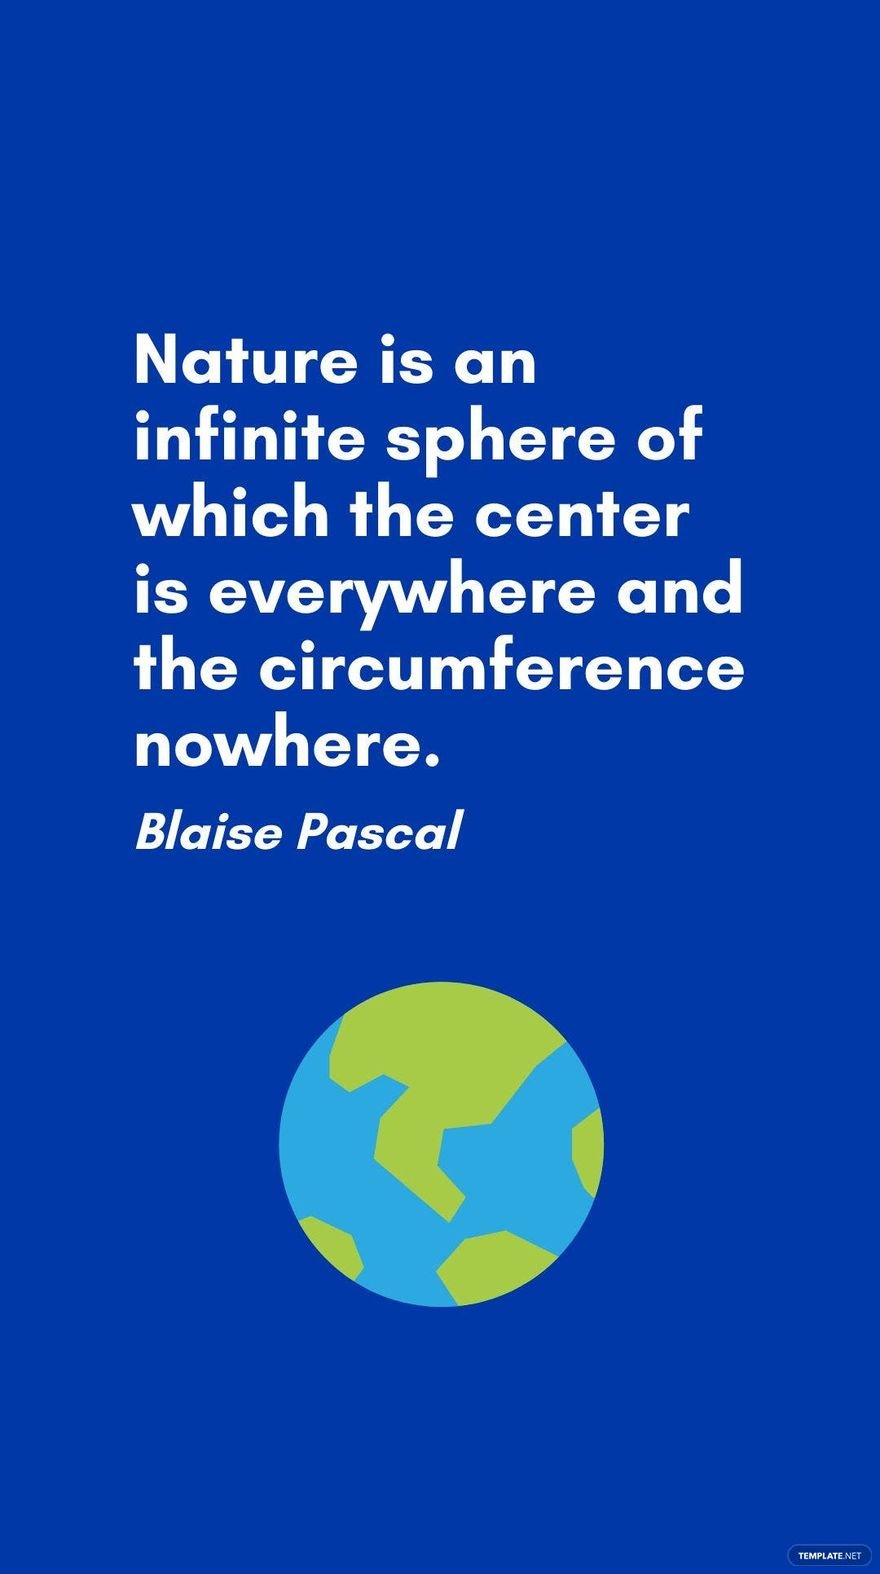 Blaise Pascal - Nature is an infinite sphere of which the center is everywhere and the circumference nowhere.